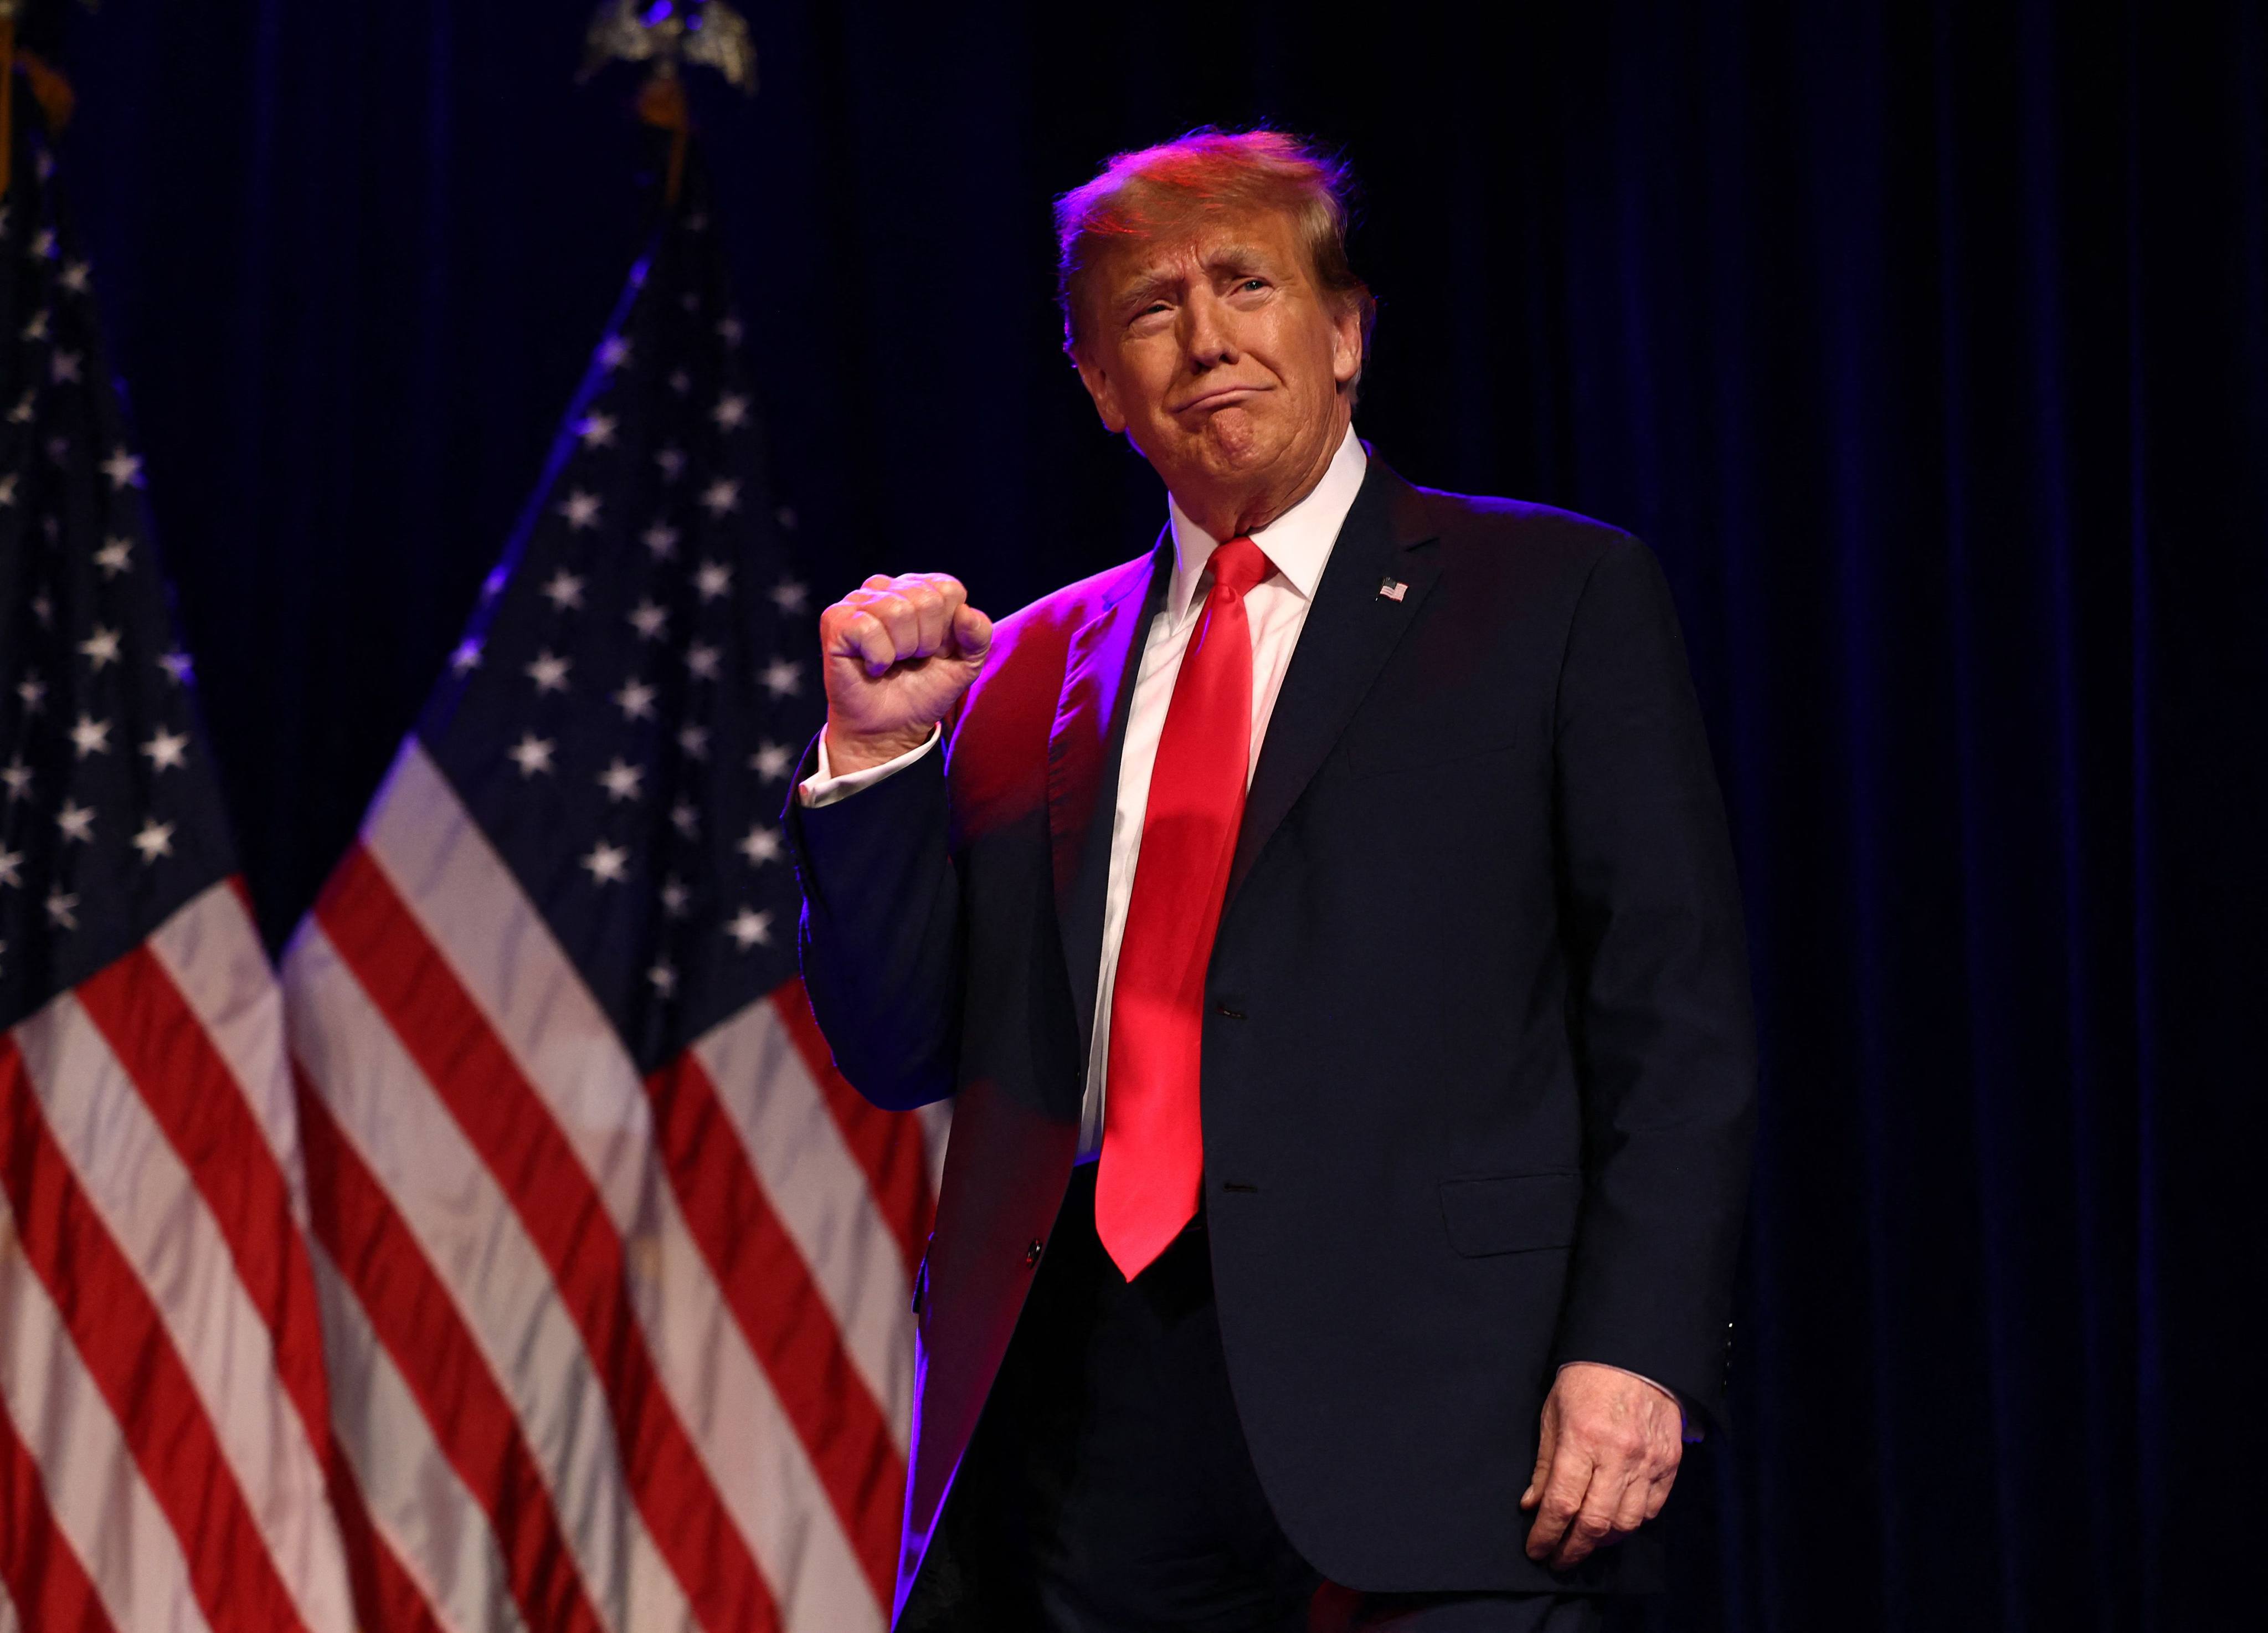 During his term of office, Trump’s policies helped drive the yuan to what was its weakest in a decade in August 2019. Photo: Getty Images via AFP